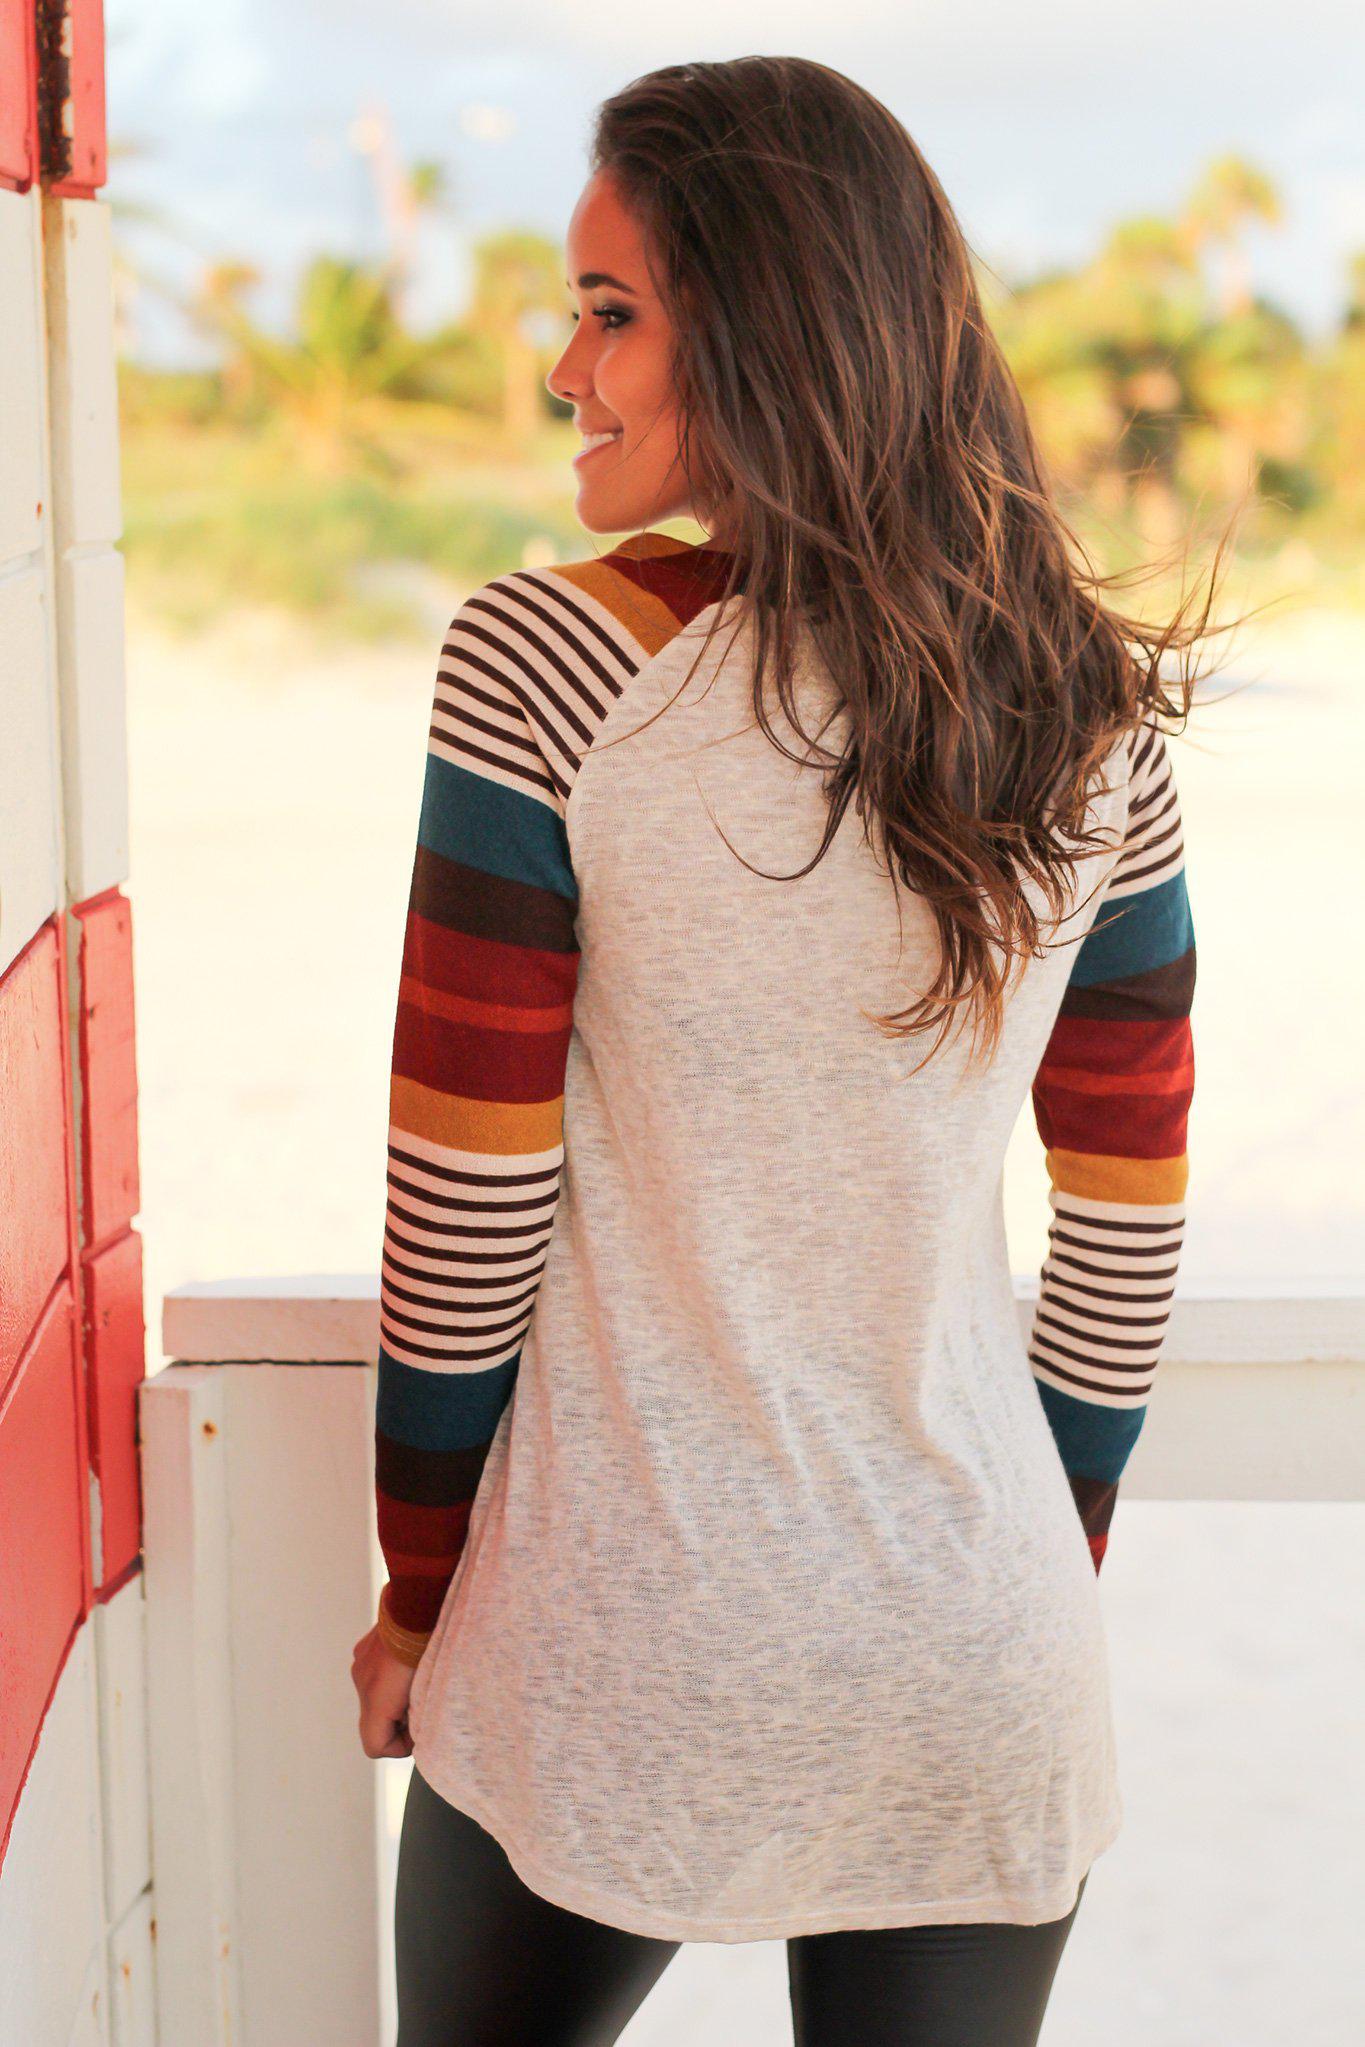 Oatmeal Top with Multi Colored Striped Sleeves